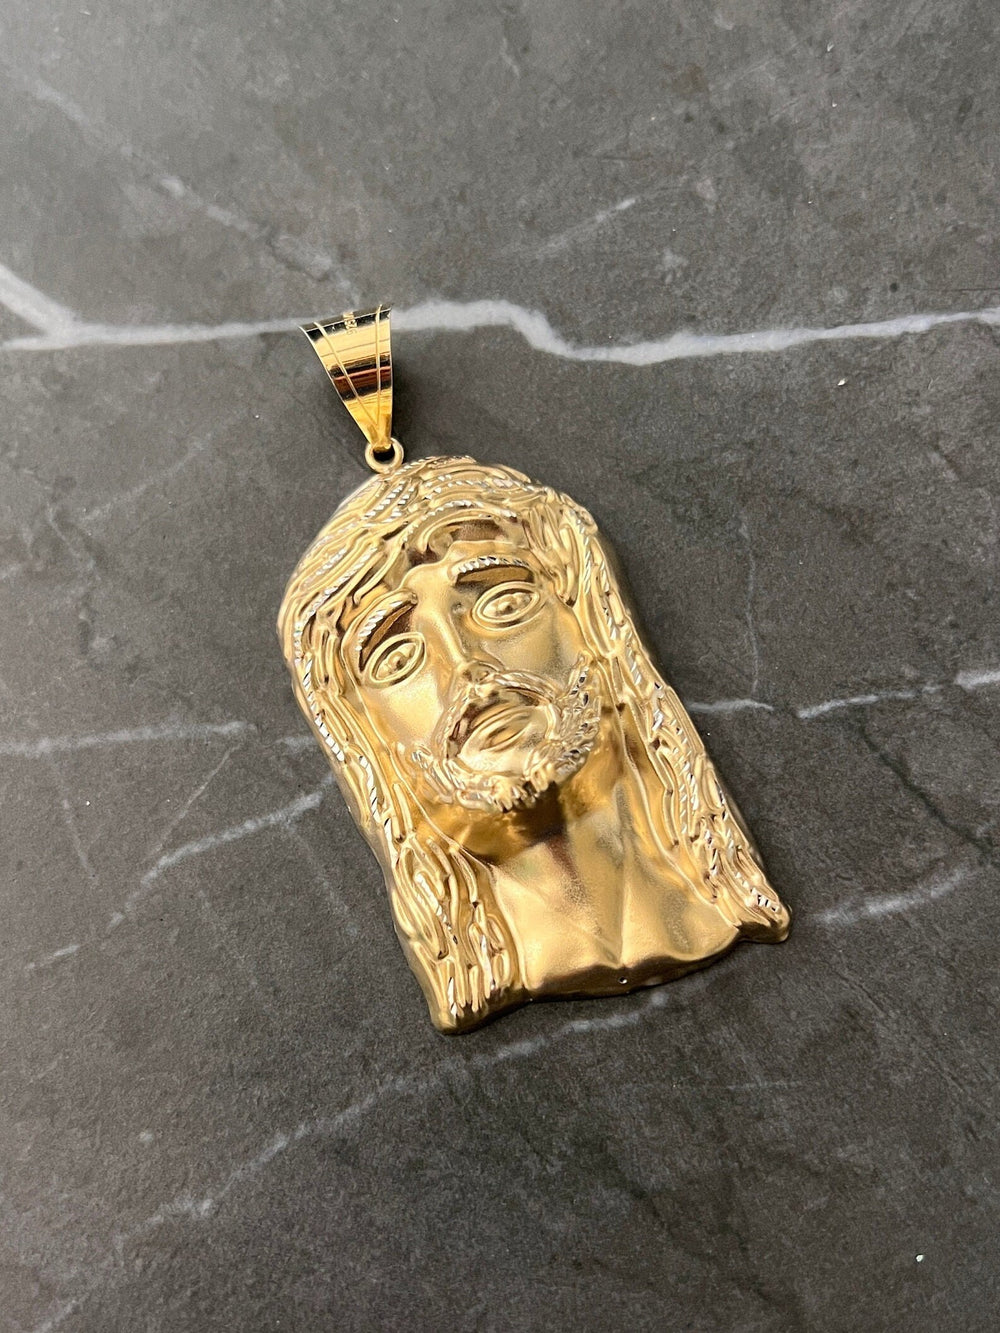 10K Yellow Gold .925 Silver Textured Diamond Cut 10K Religious Jesus Face/Head Charm/Pendant 10K "the Face of Jesus will Always be with You"